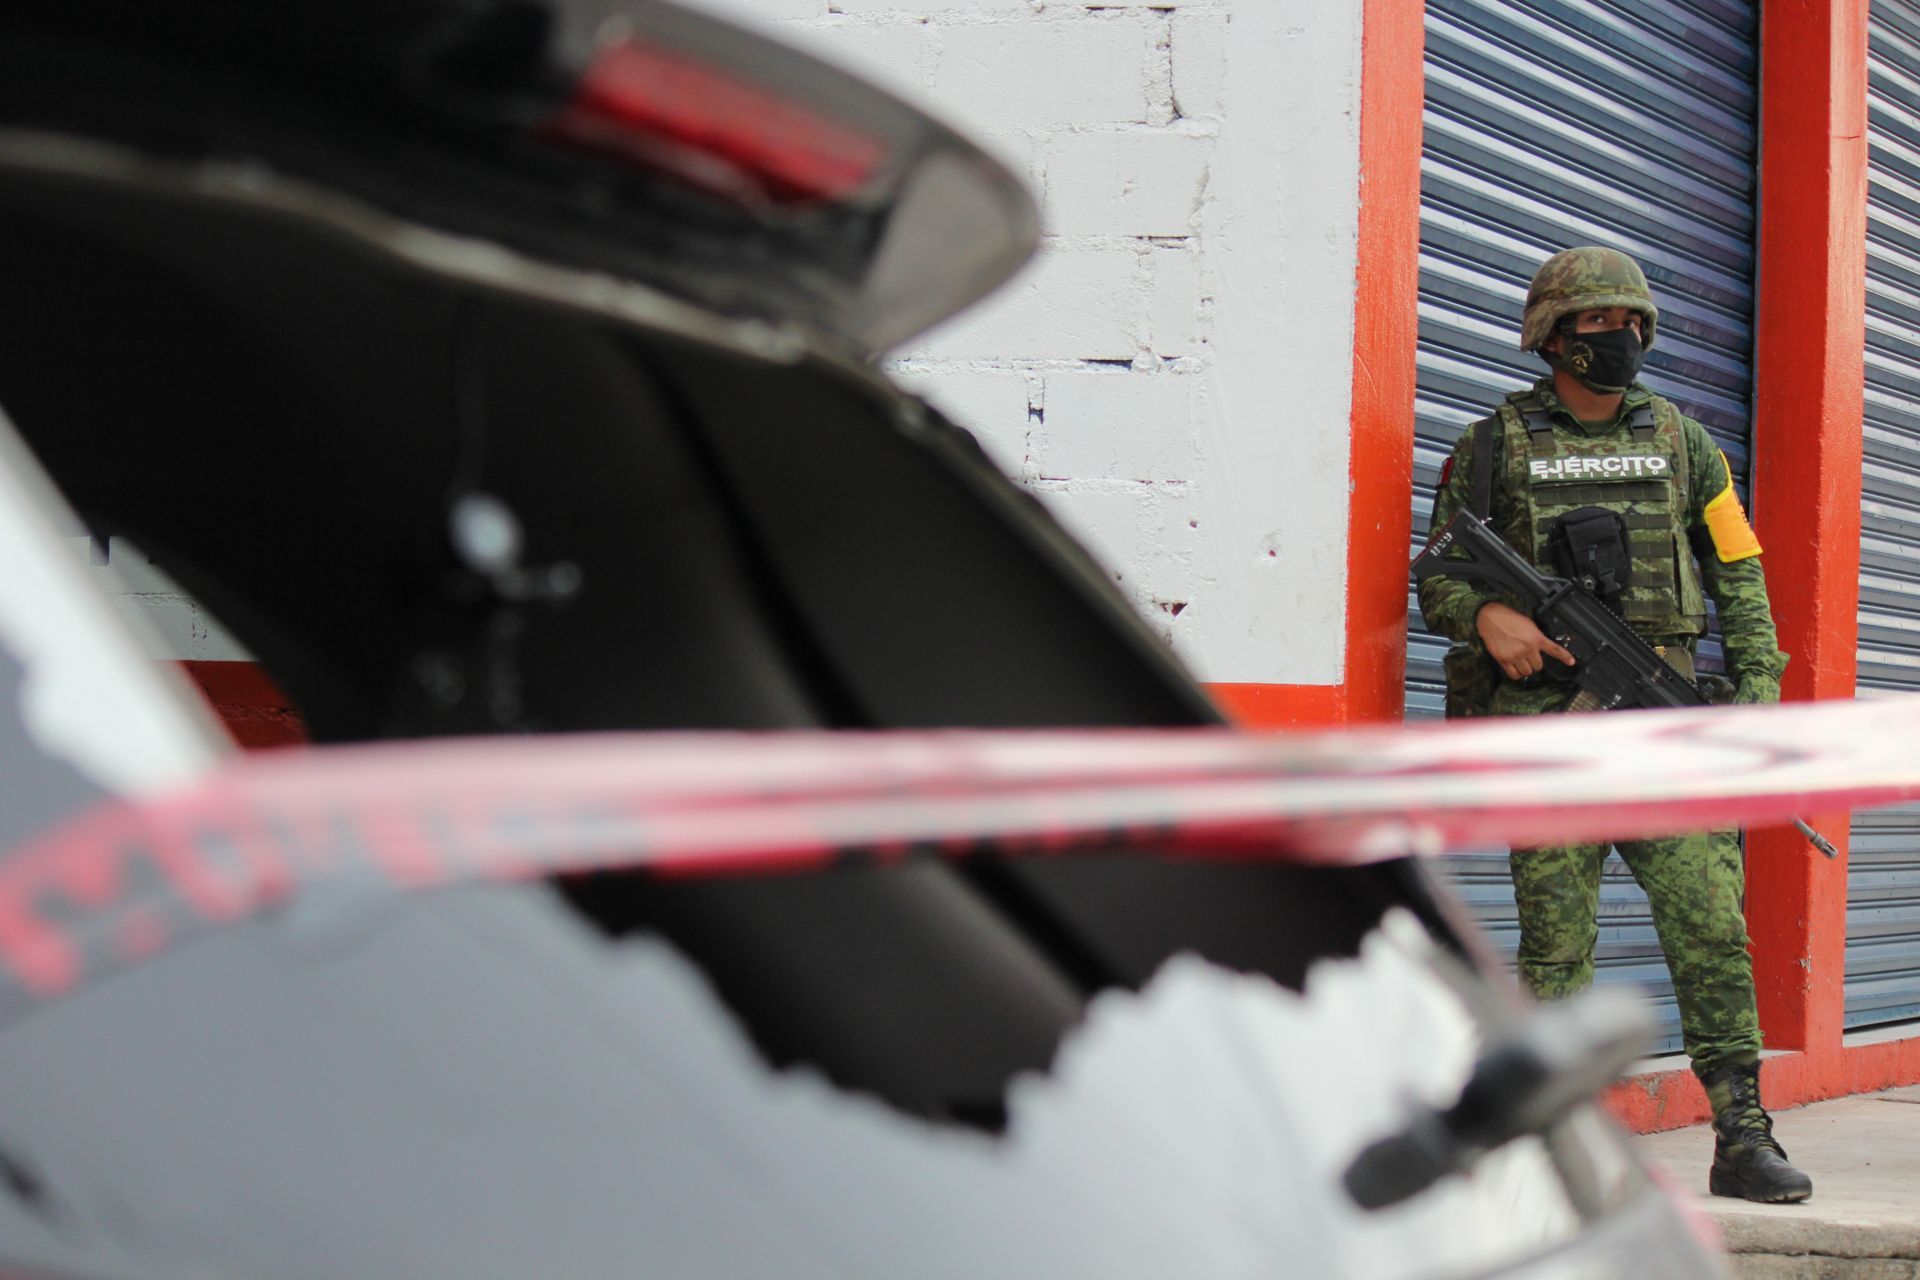 Matamoros records clashes, shootings and blockades; there are 4 dead